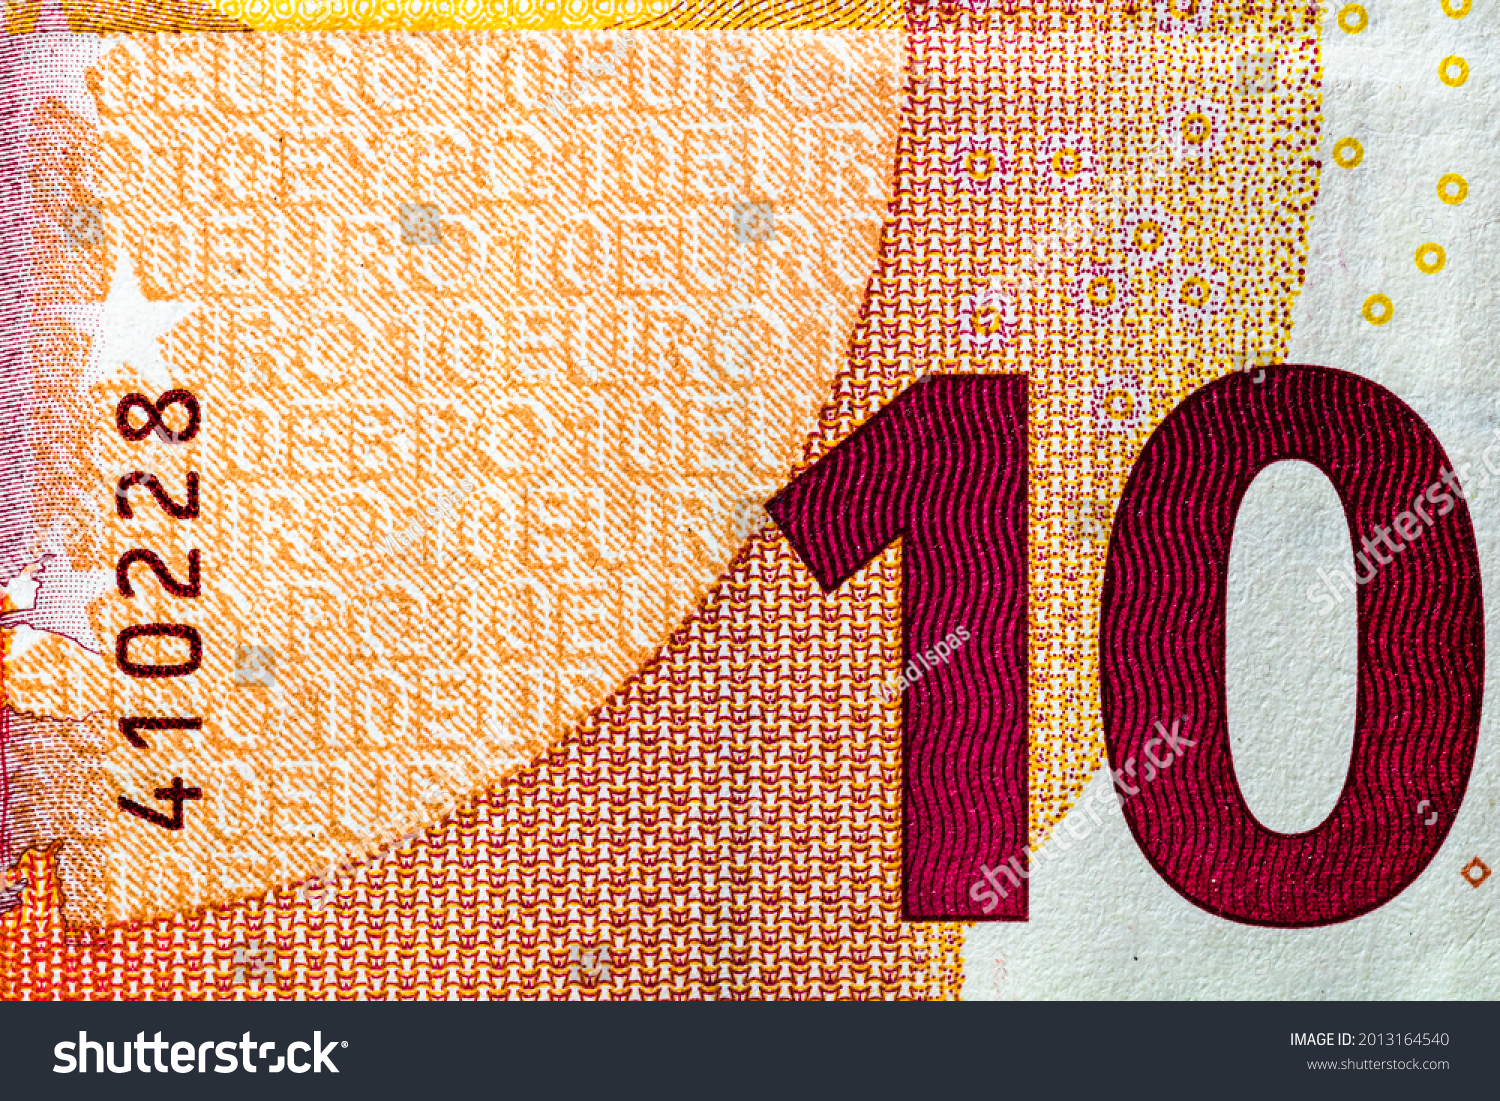 Selective focus on detail of EURO banknotes. Close up macro detail of EURO banknotes #2013164540